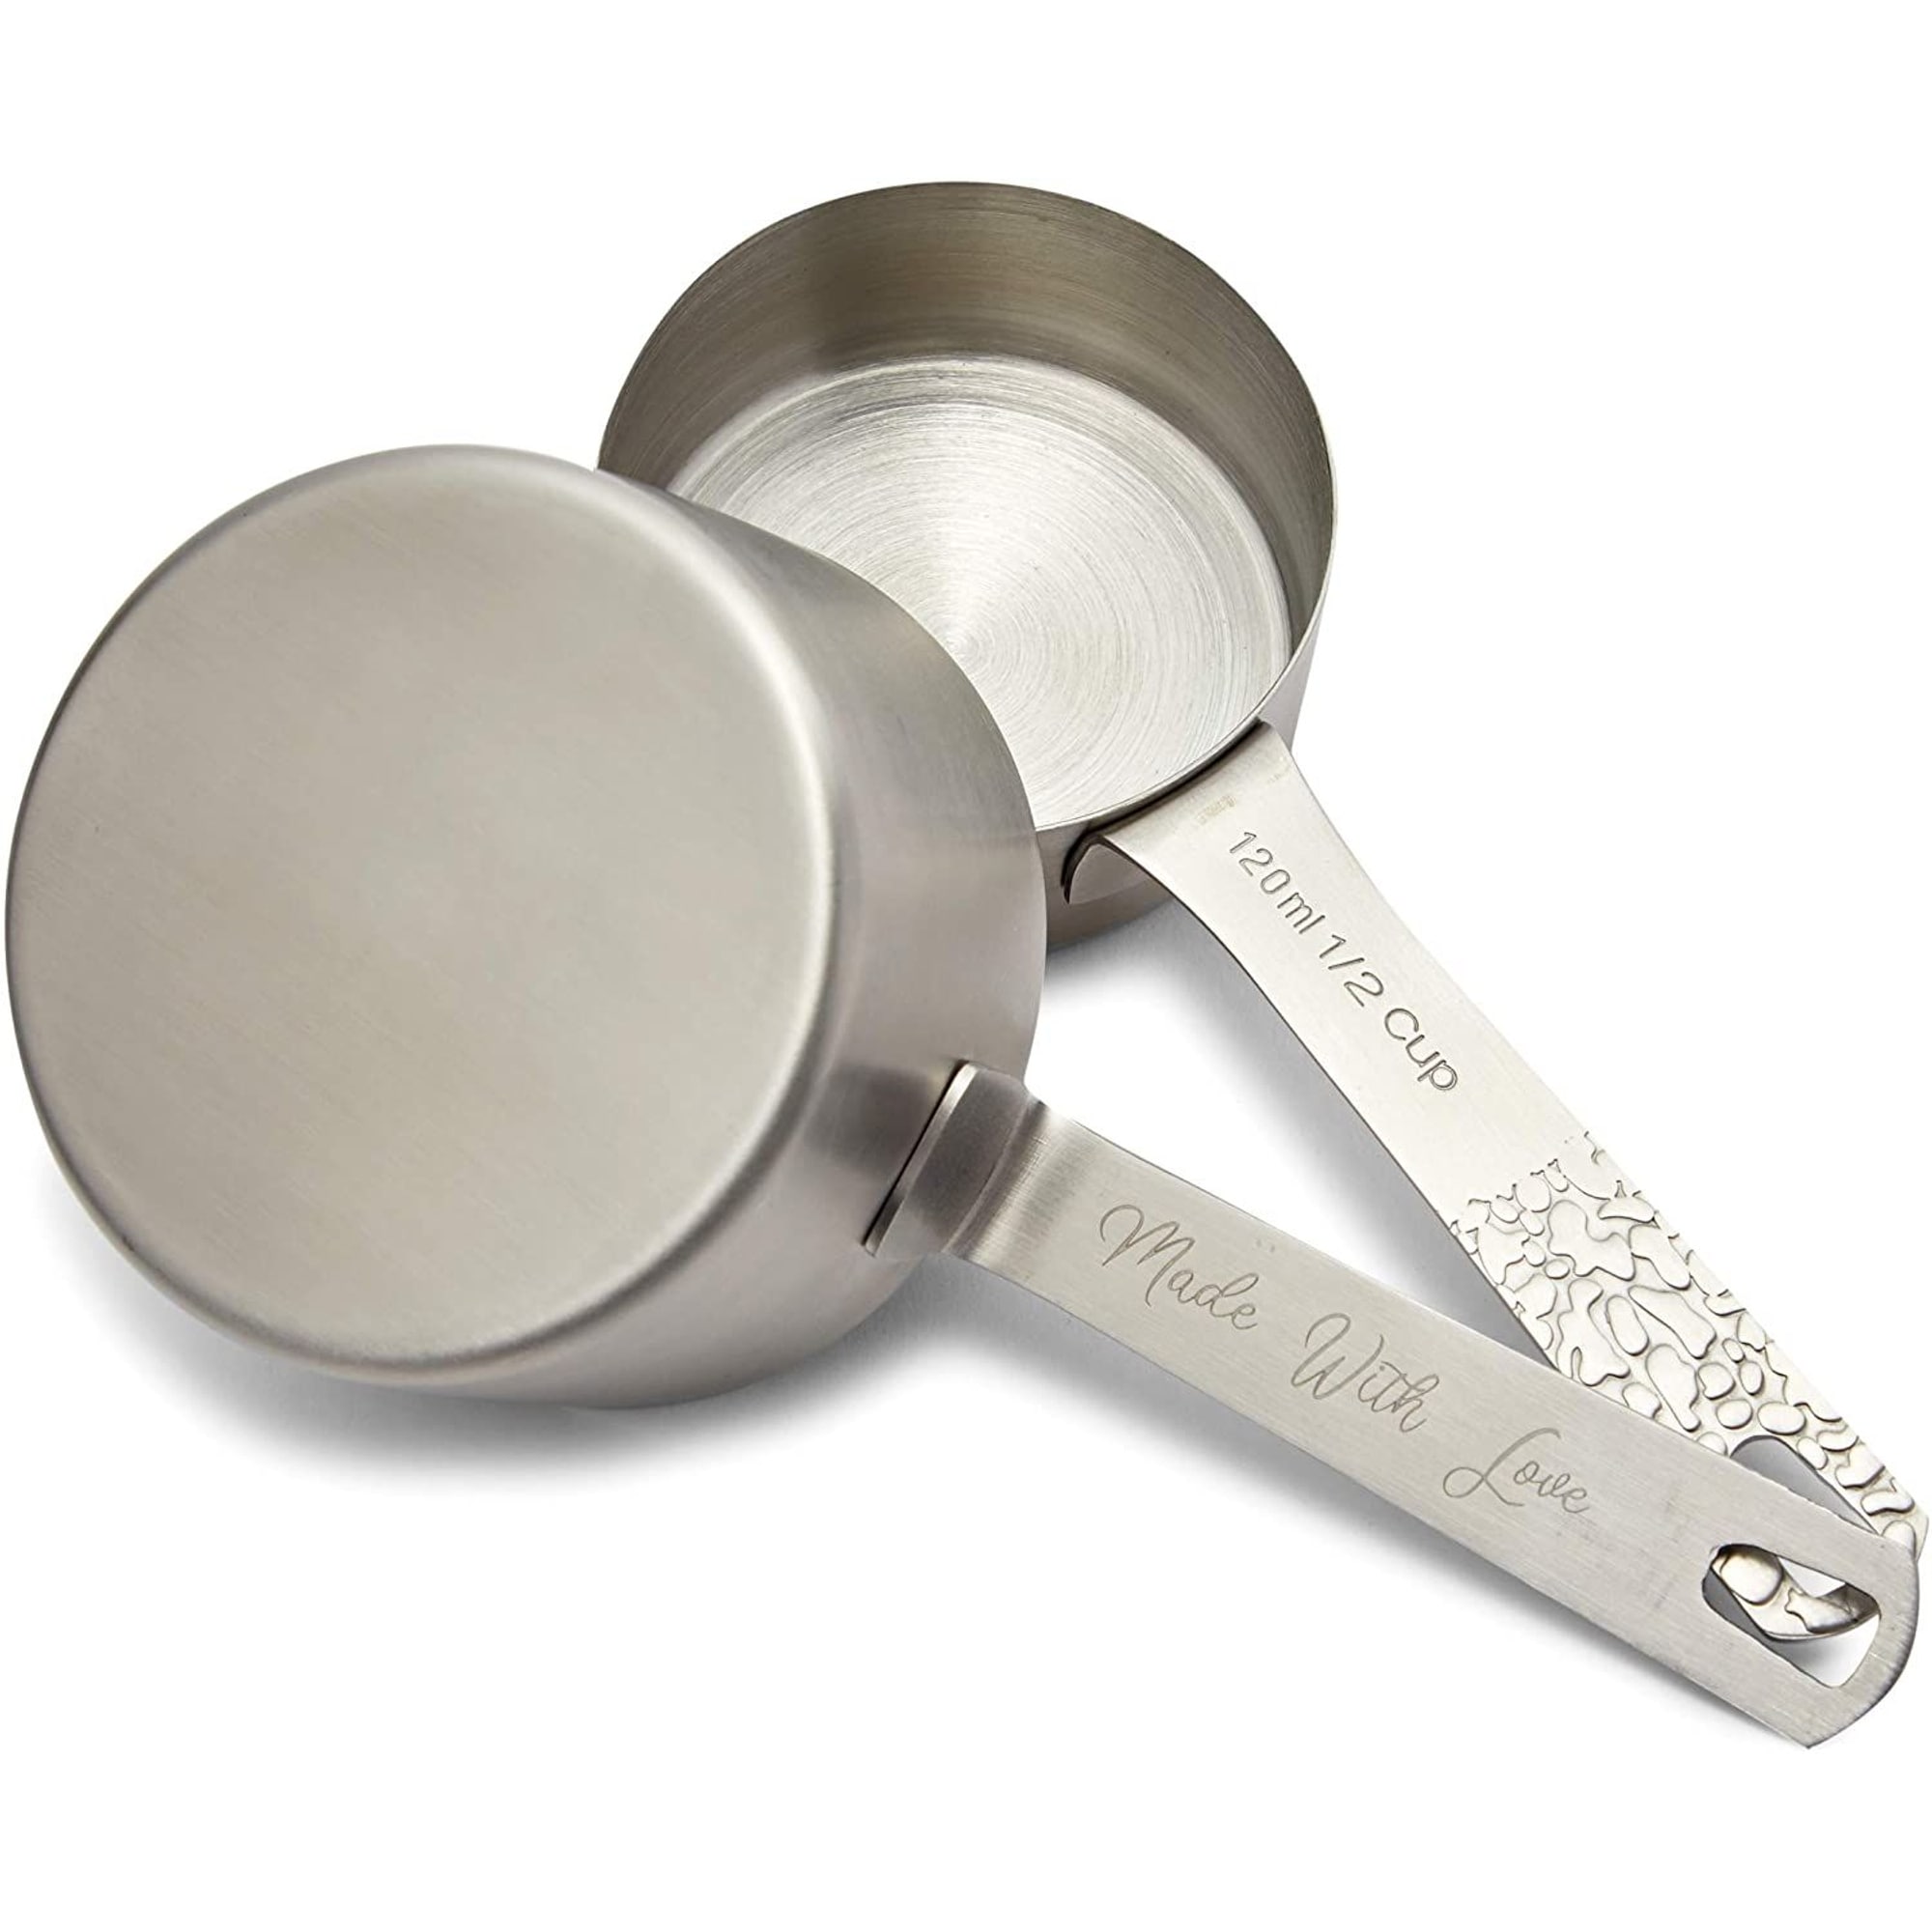 https://ak1.ostkcdn.com/images/products/is/images/direct/50ad2d9bc643d4fbf4235b7cae61c39b486feb8a/Stainless-Steel-Measuring-Cup-and-Spoon-Set%2C-US-and-Metric-Measurements-%2811-Sizes%29.jpg